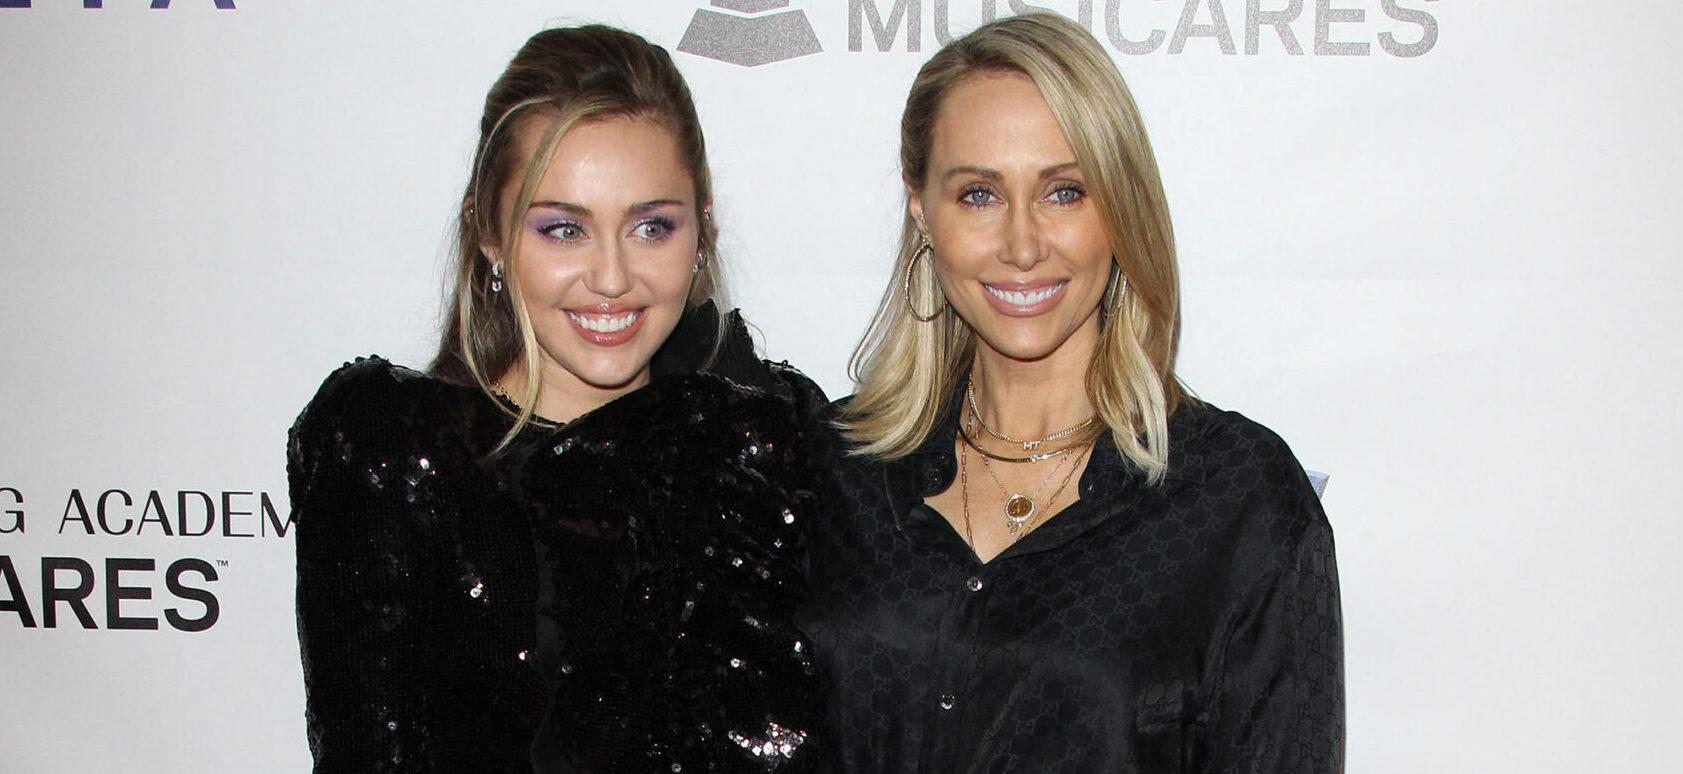 Miley Cyrus Couldn’t Hold Back Her Emotions As Maid Of Honor At Her Mom’s Wedding